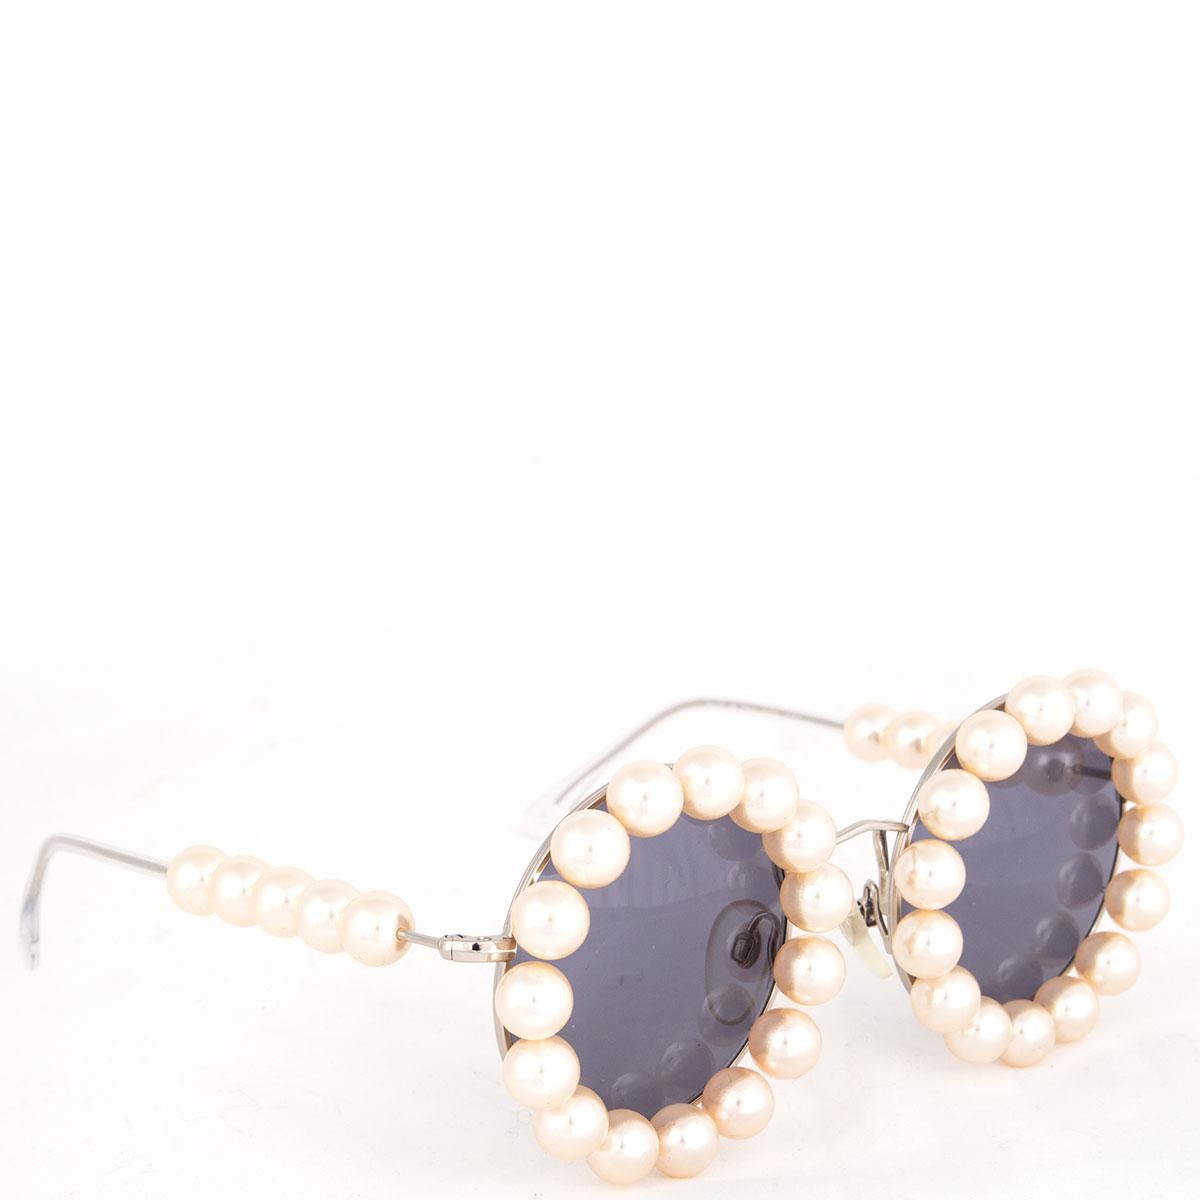 100% authentic Chanel Vintage 1994 round sunglasses embellished with off-white faux pearls with grey lenses. Have been worn and are in excellent condition. Come with case. 

Measurements
Width	13cm (5.1in)
Height	6cm (2.3in)

All our listings